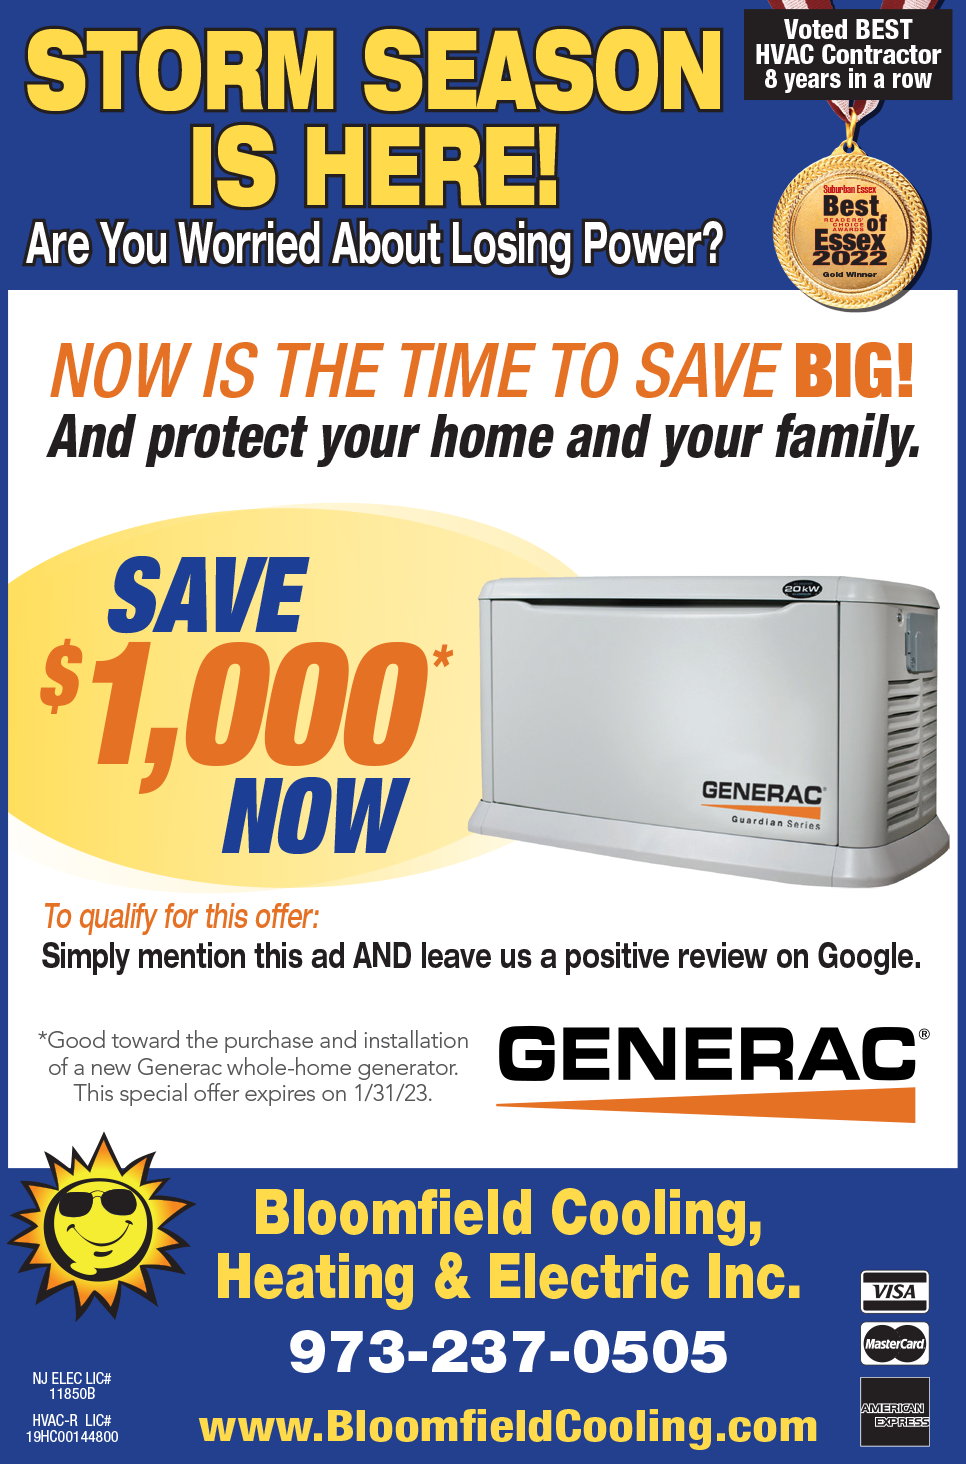 Special Generator Offer from Bloomfield Cooling, Heating and Electric